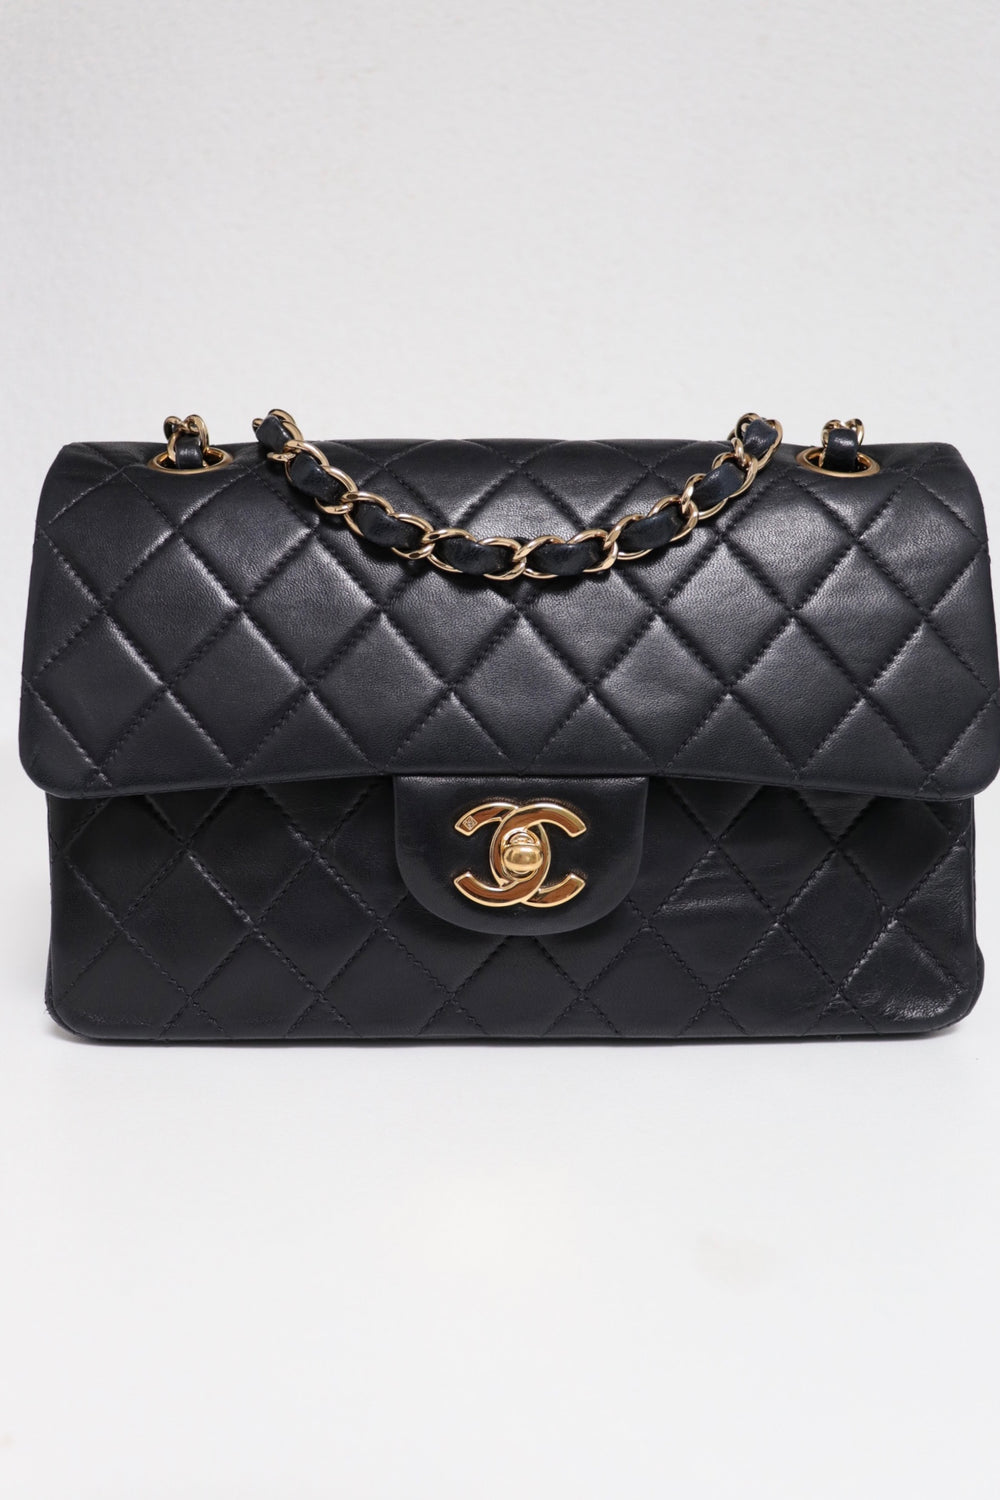 chanel double flap second hand